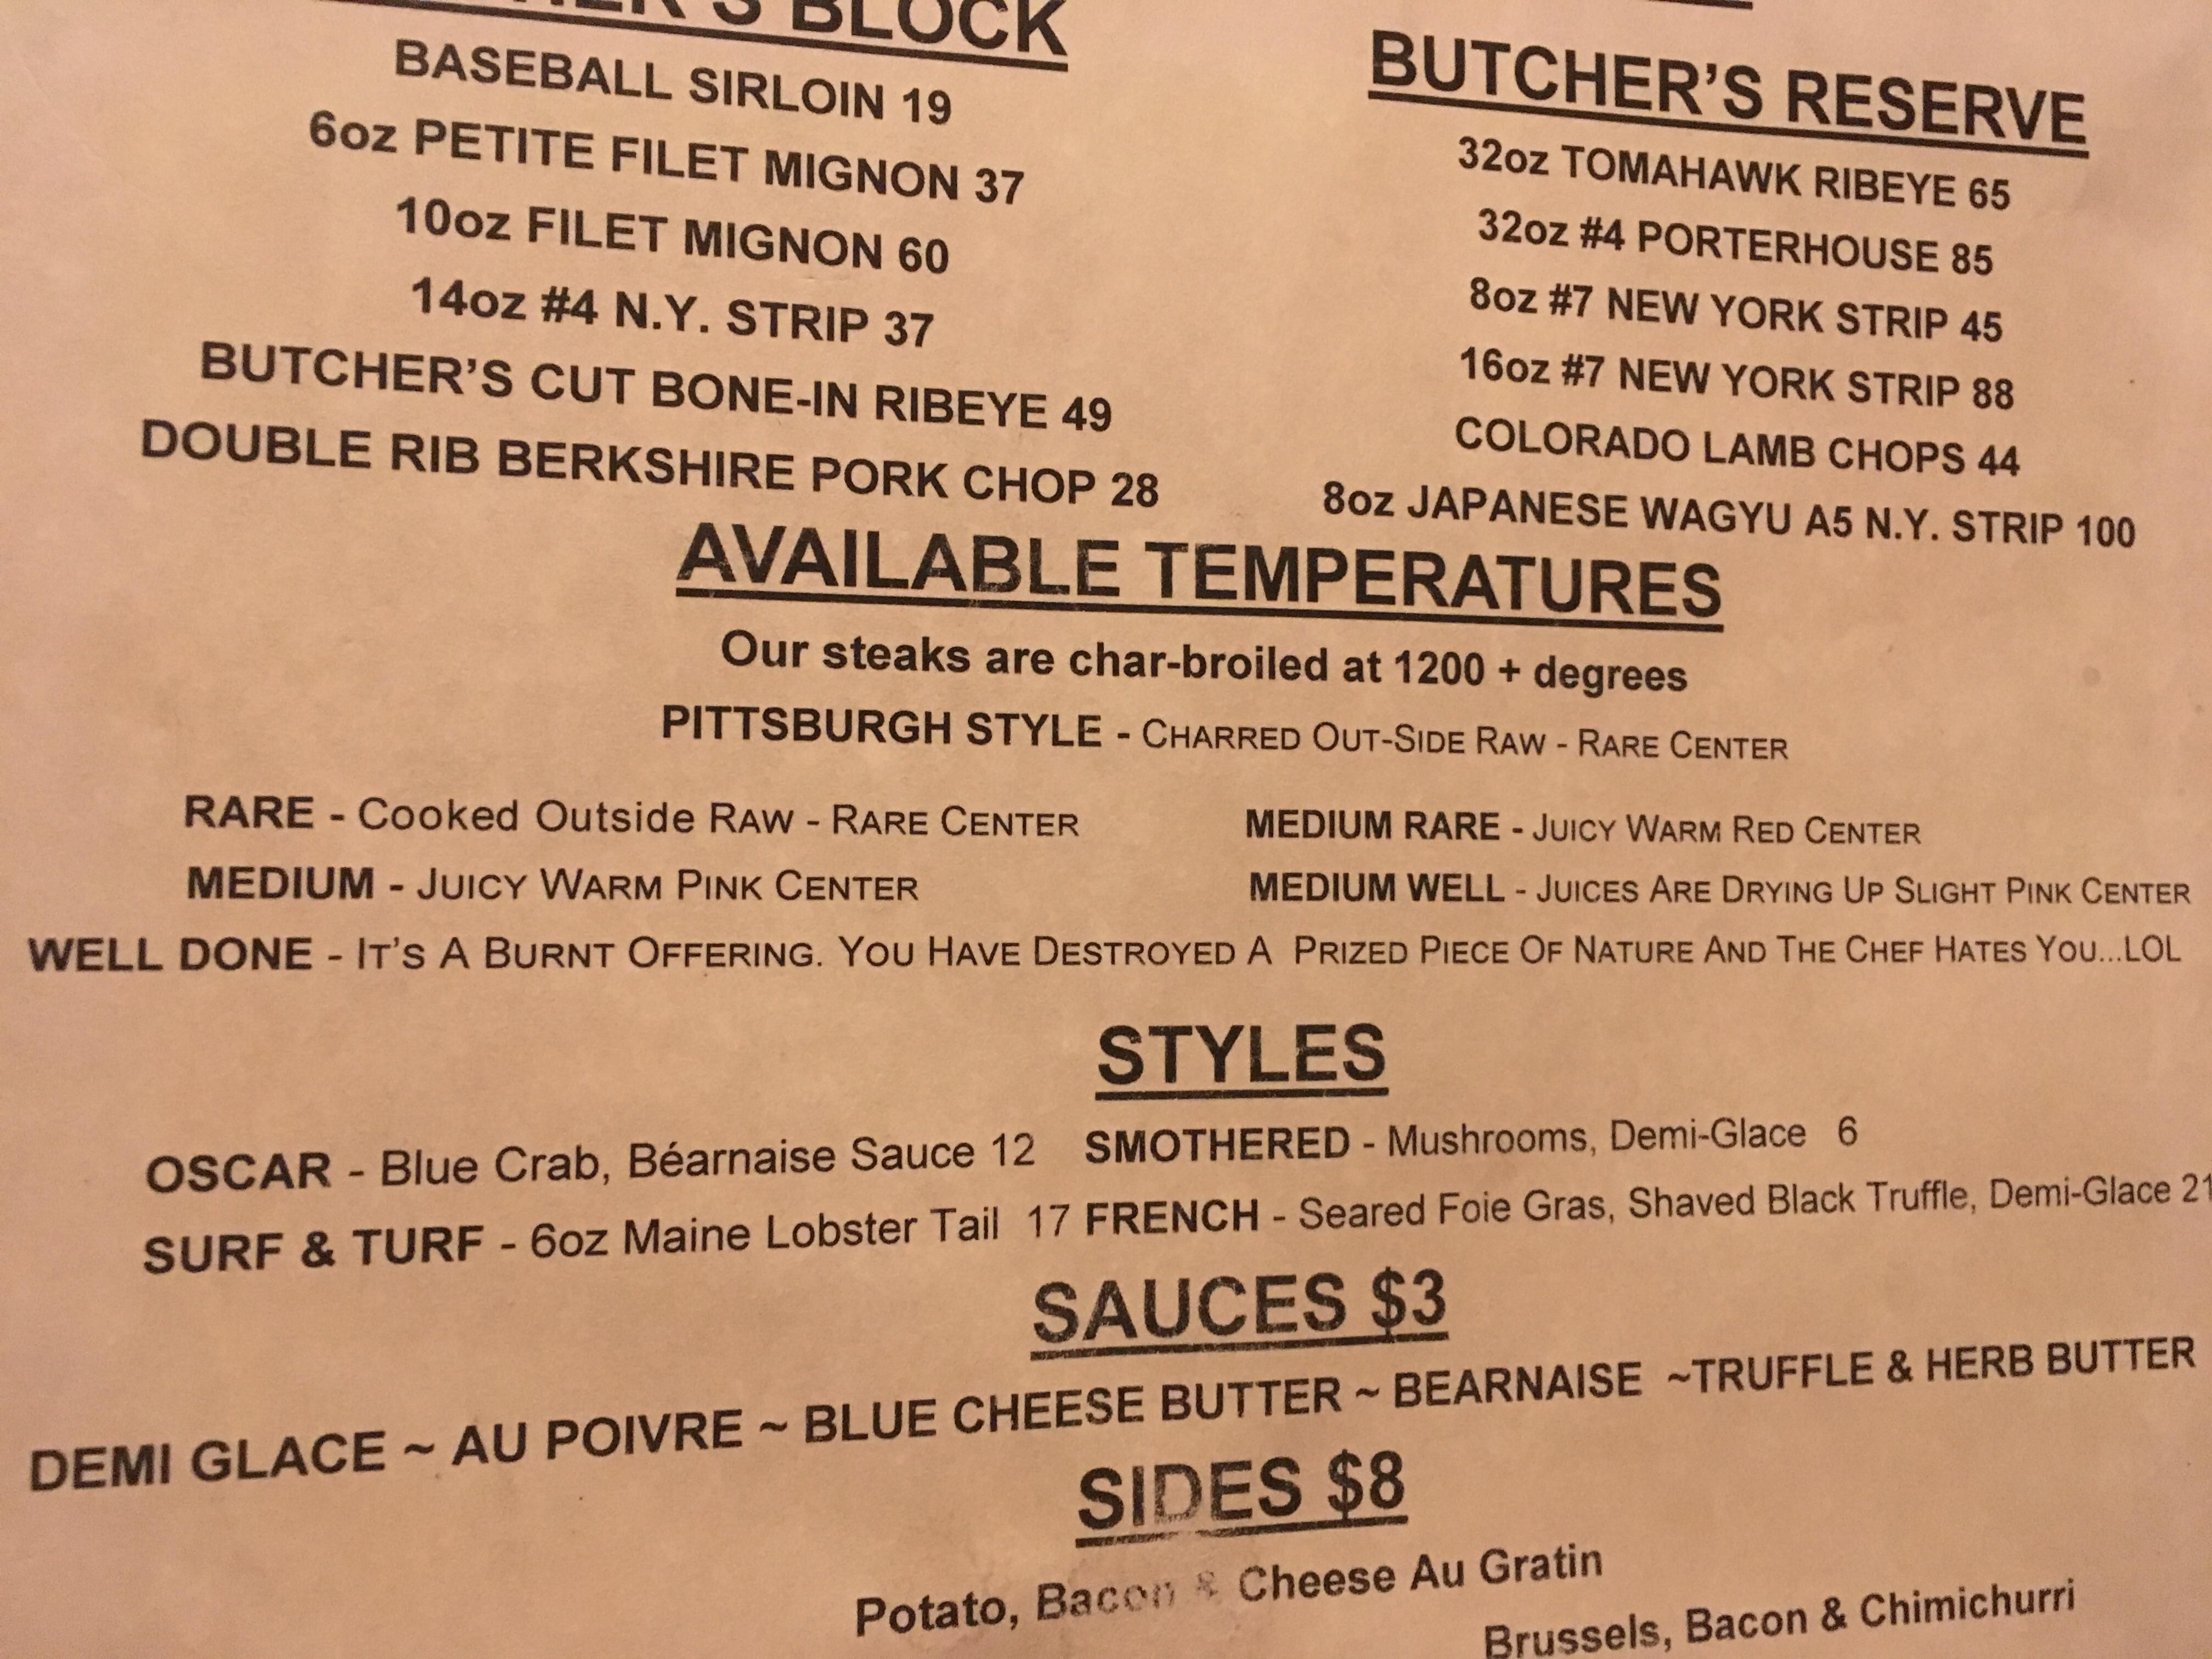 The description of 'well done' at a nearby steakhouse